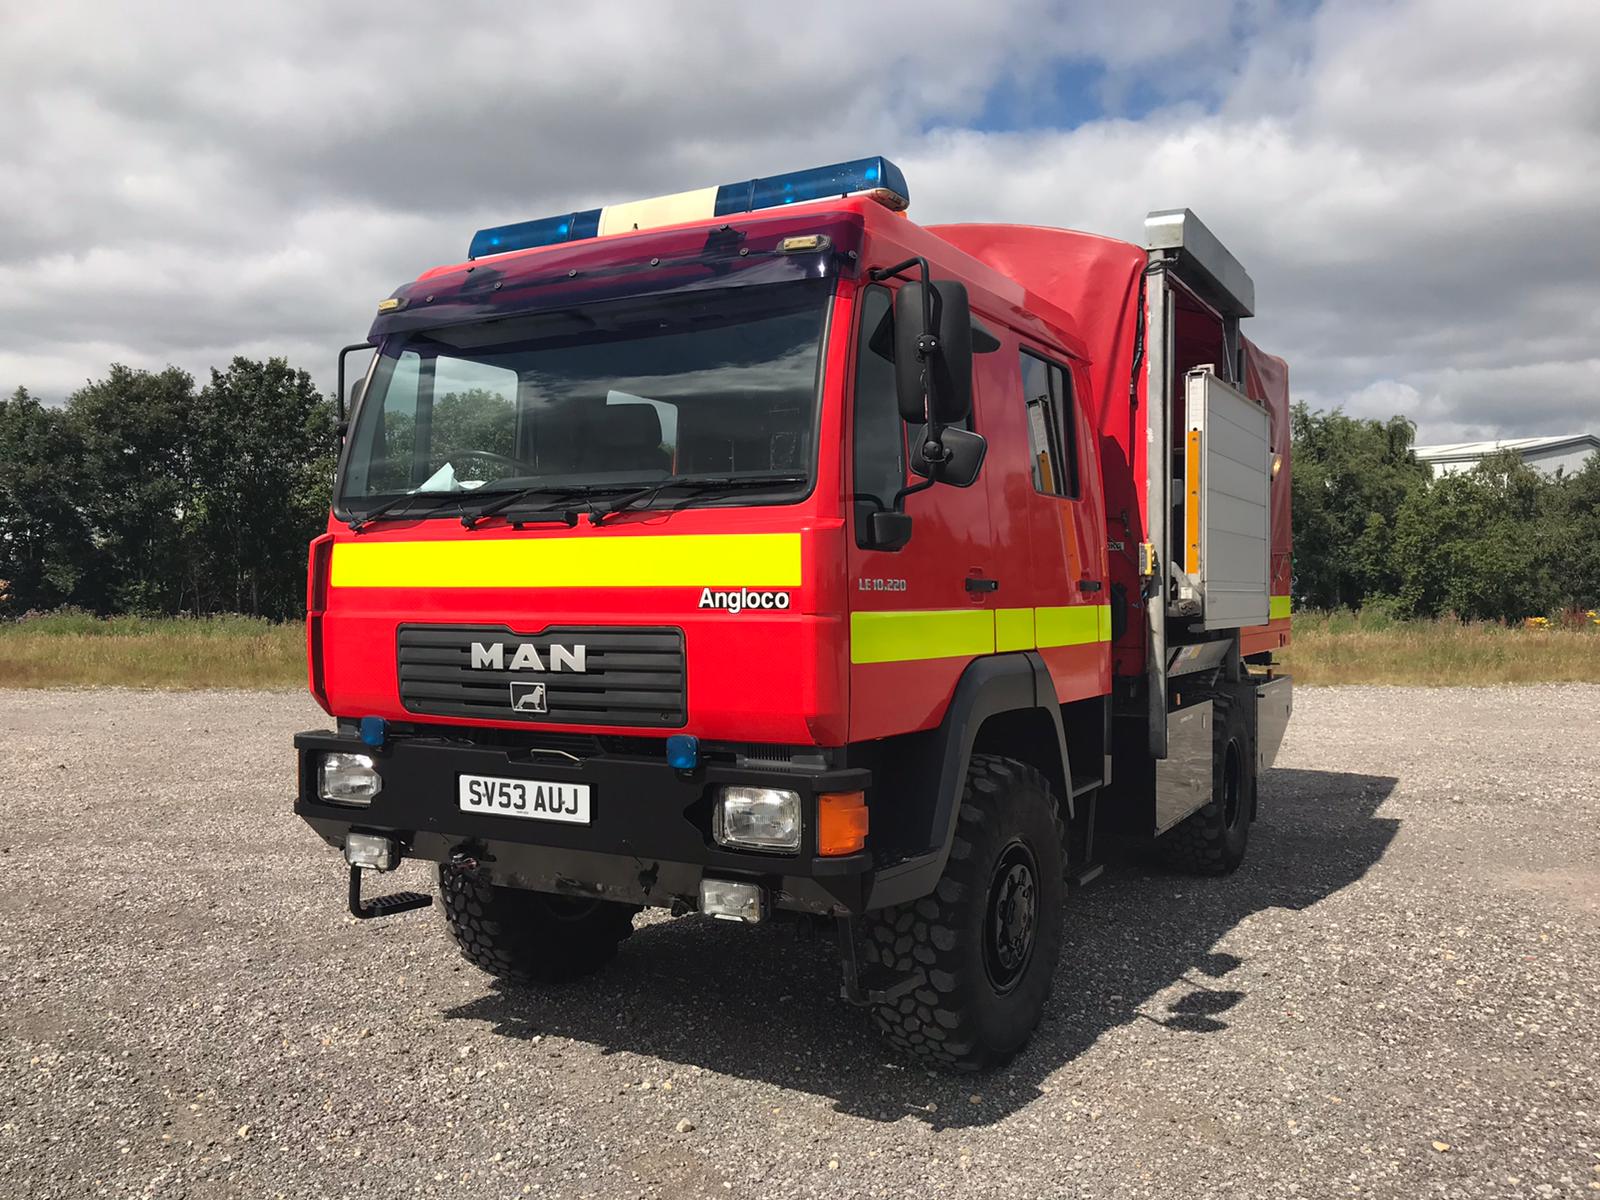 MAN LE 10.220 4x4 Crew Cab Truck (Not a Fire Engine) - Govsales of mod surplus ex army trucks, ex army land rovers and other military vehicles for sale